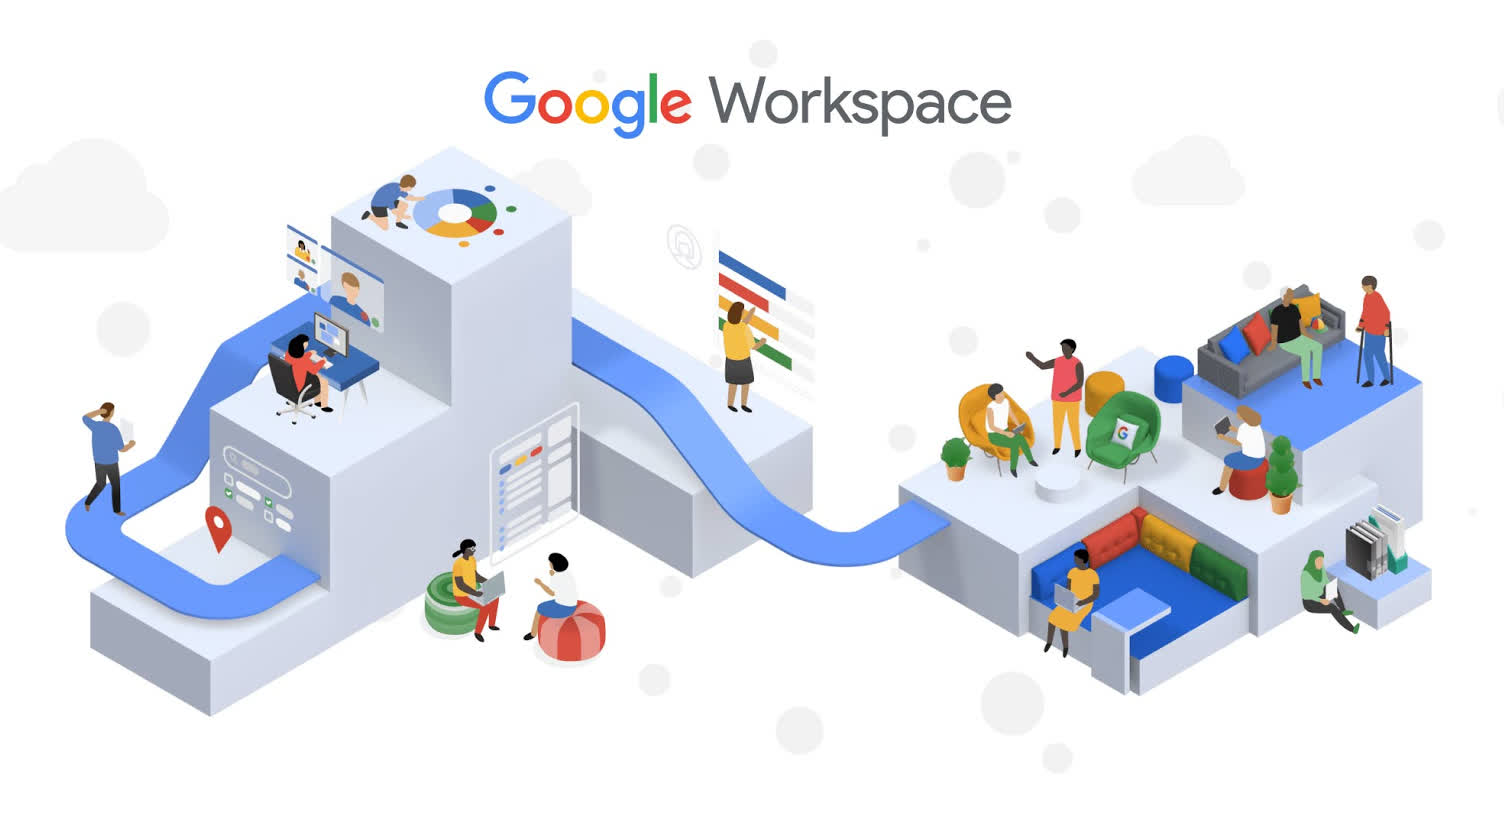 Google Smart Canvas brings integrated collaboration to Workspace